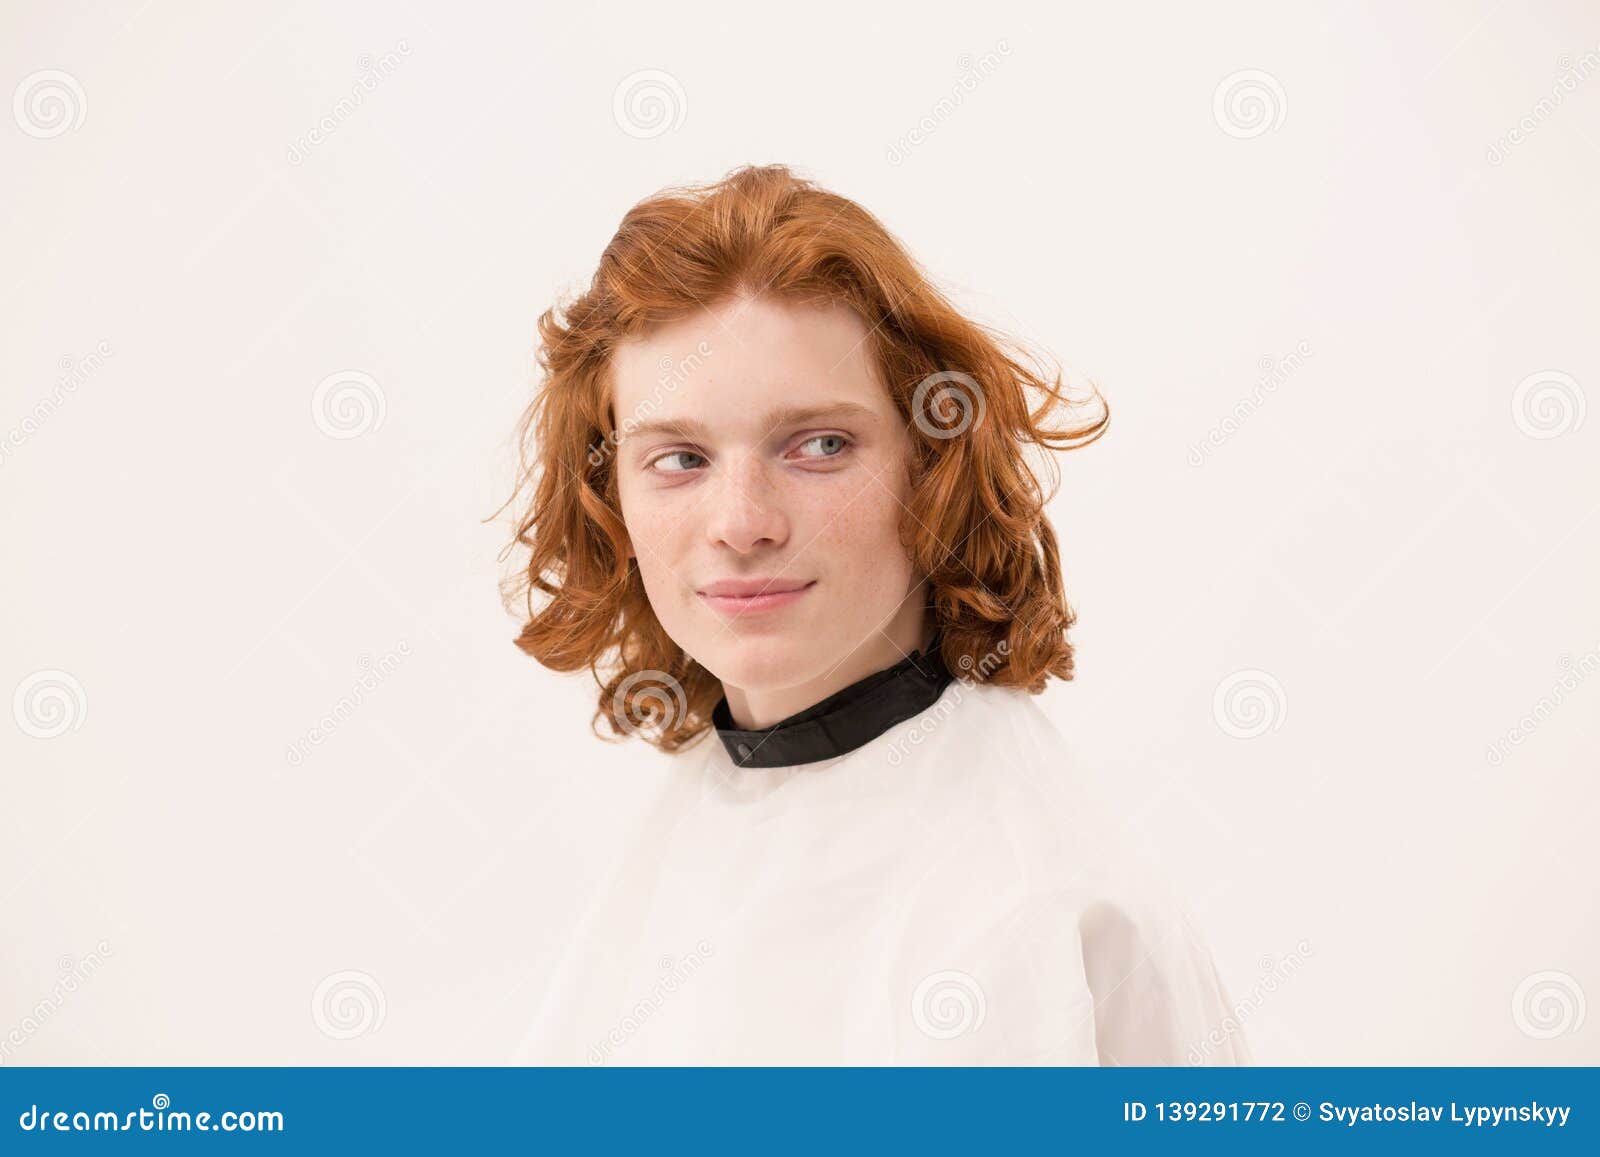 Handsome Man With Ginger Hair Before Haircut Stock Photo